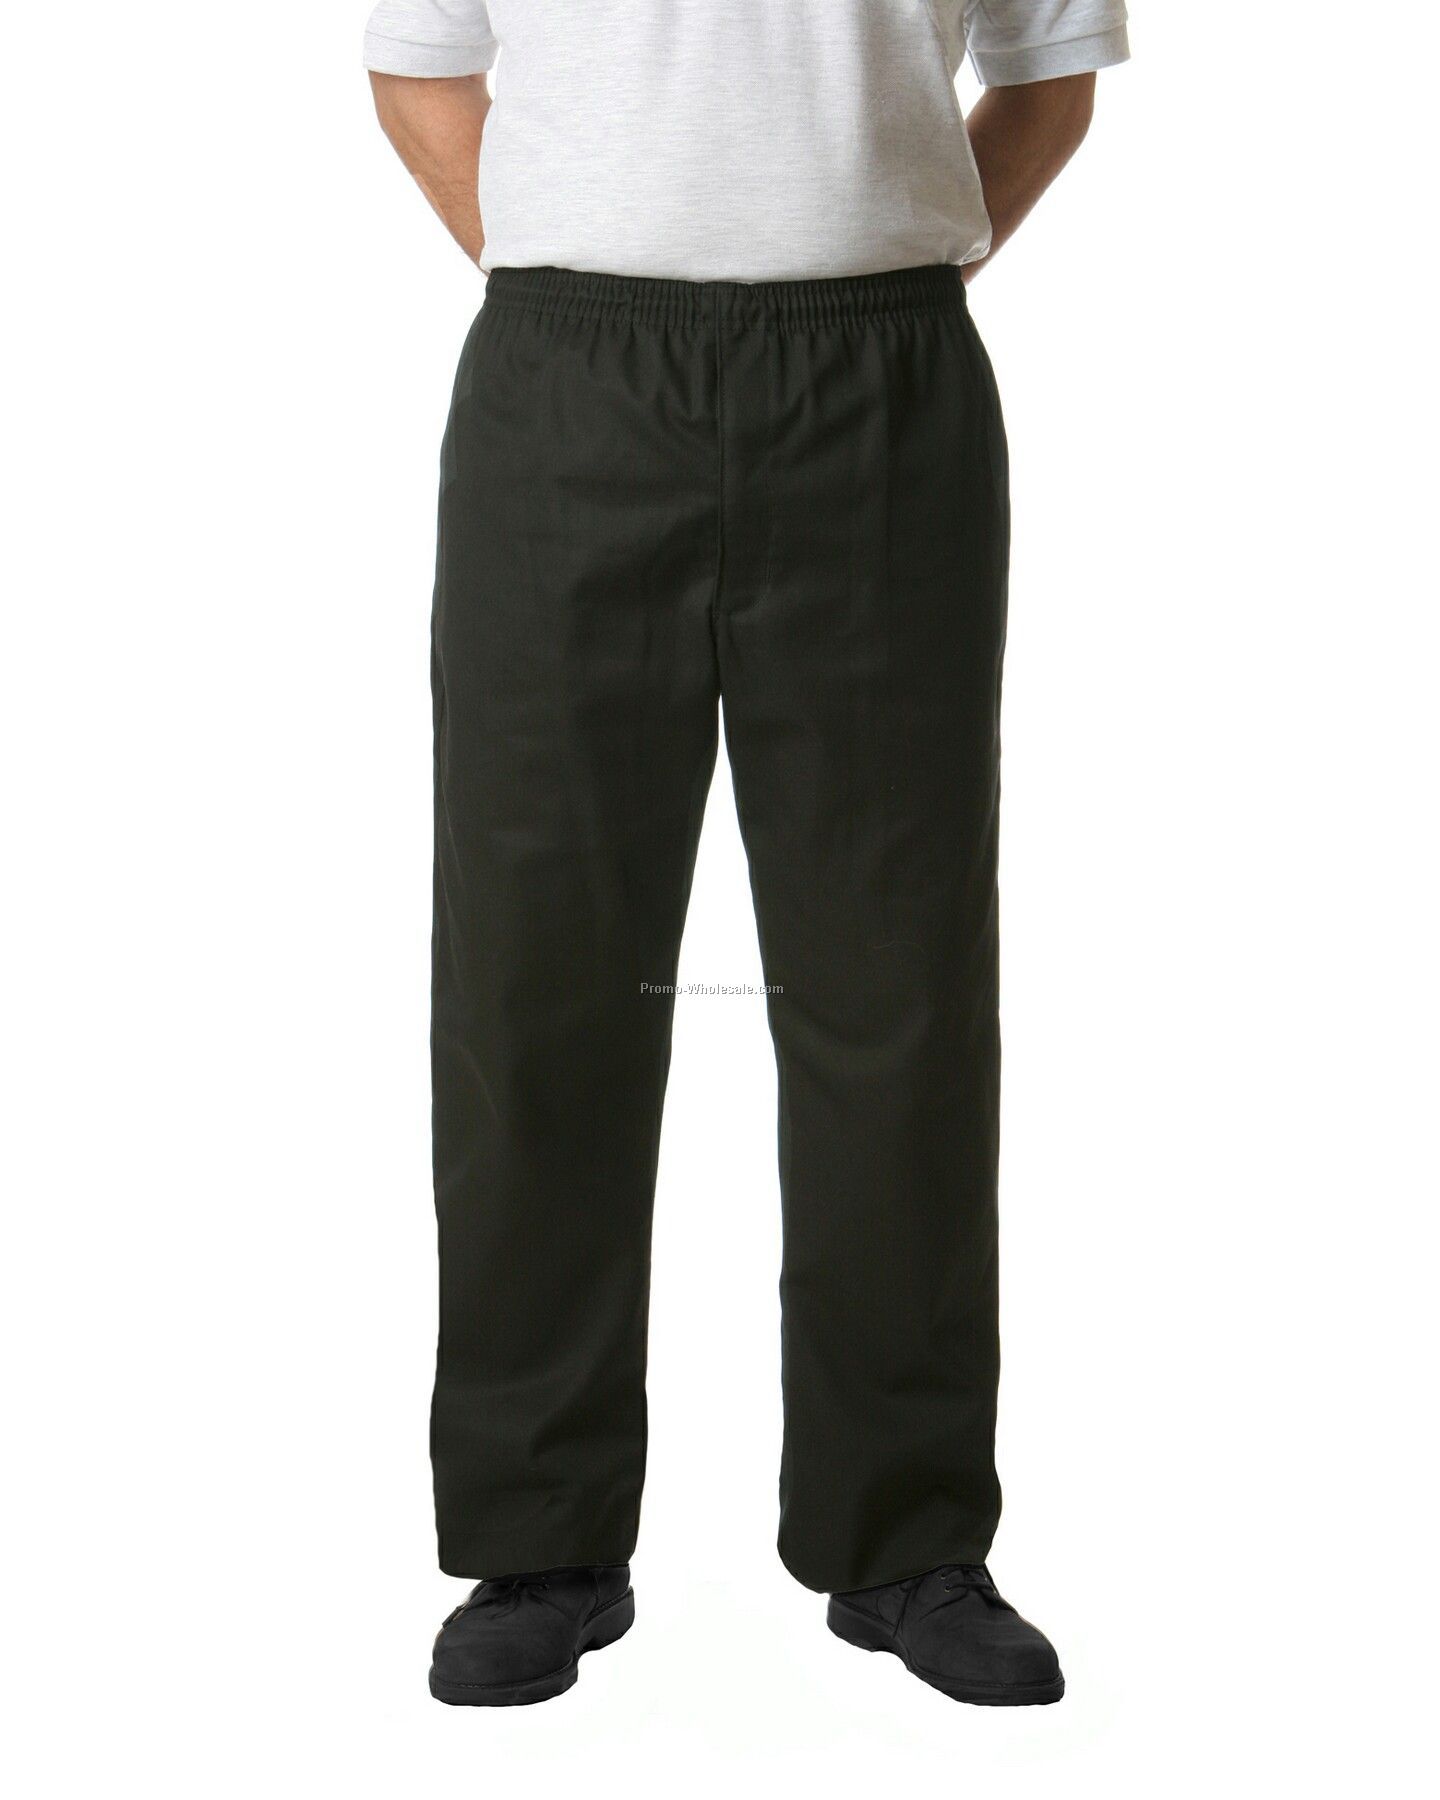 Chef Baggies Pants (X-large/ Houndstooth)